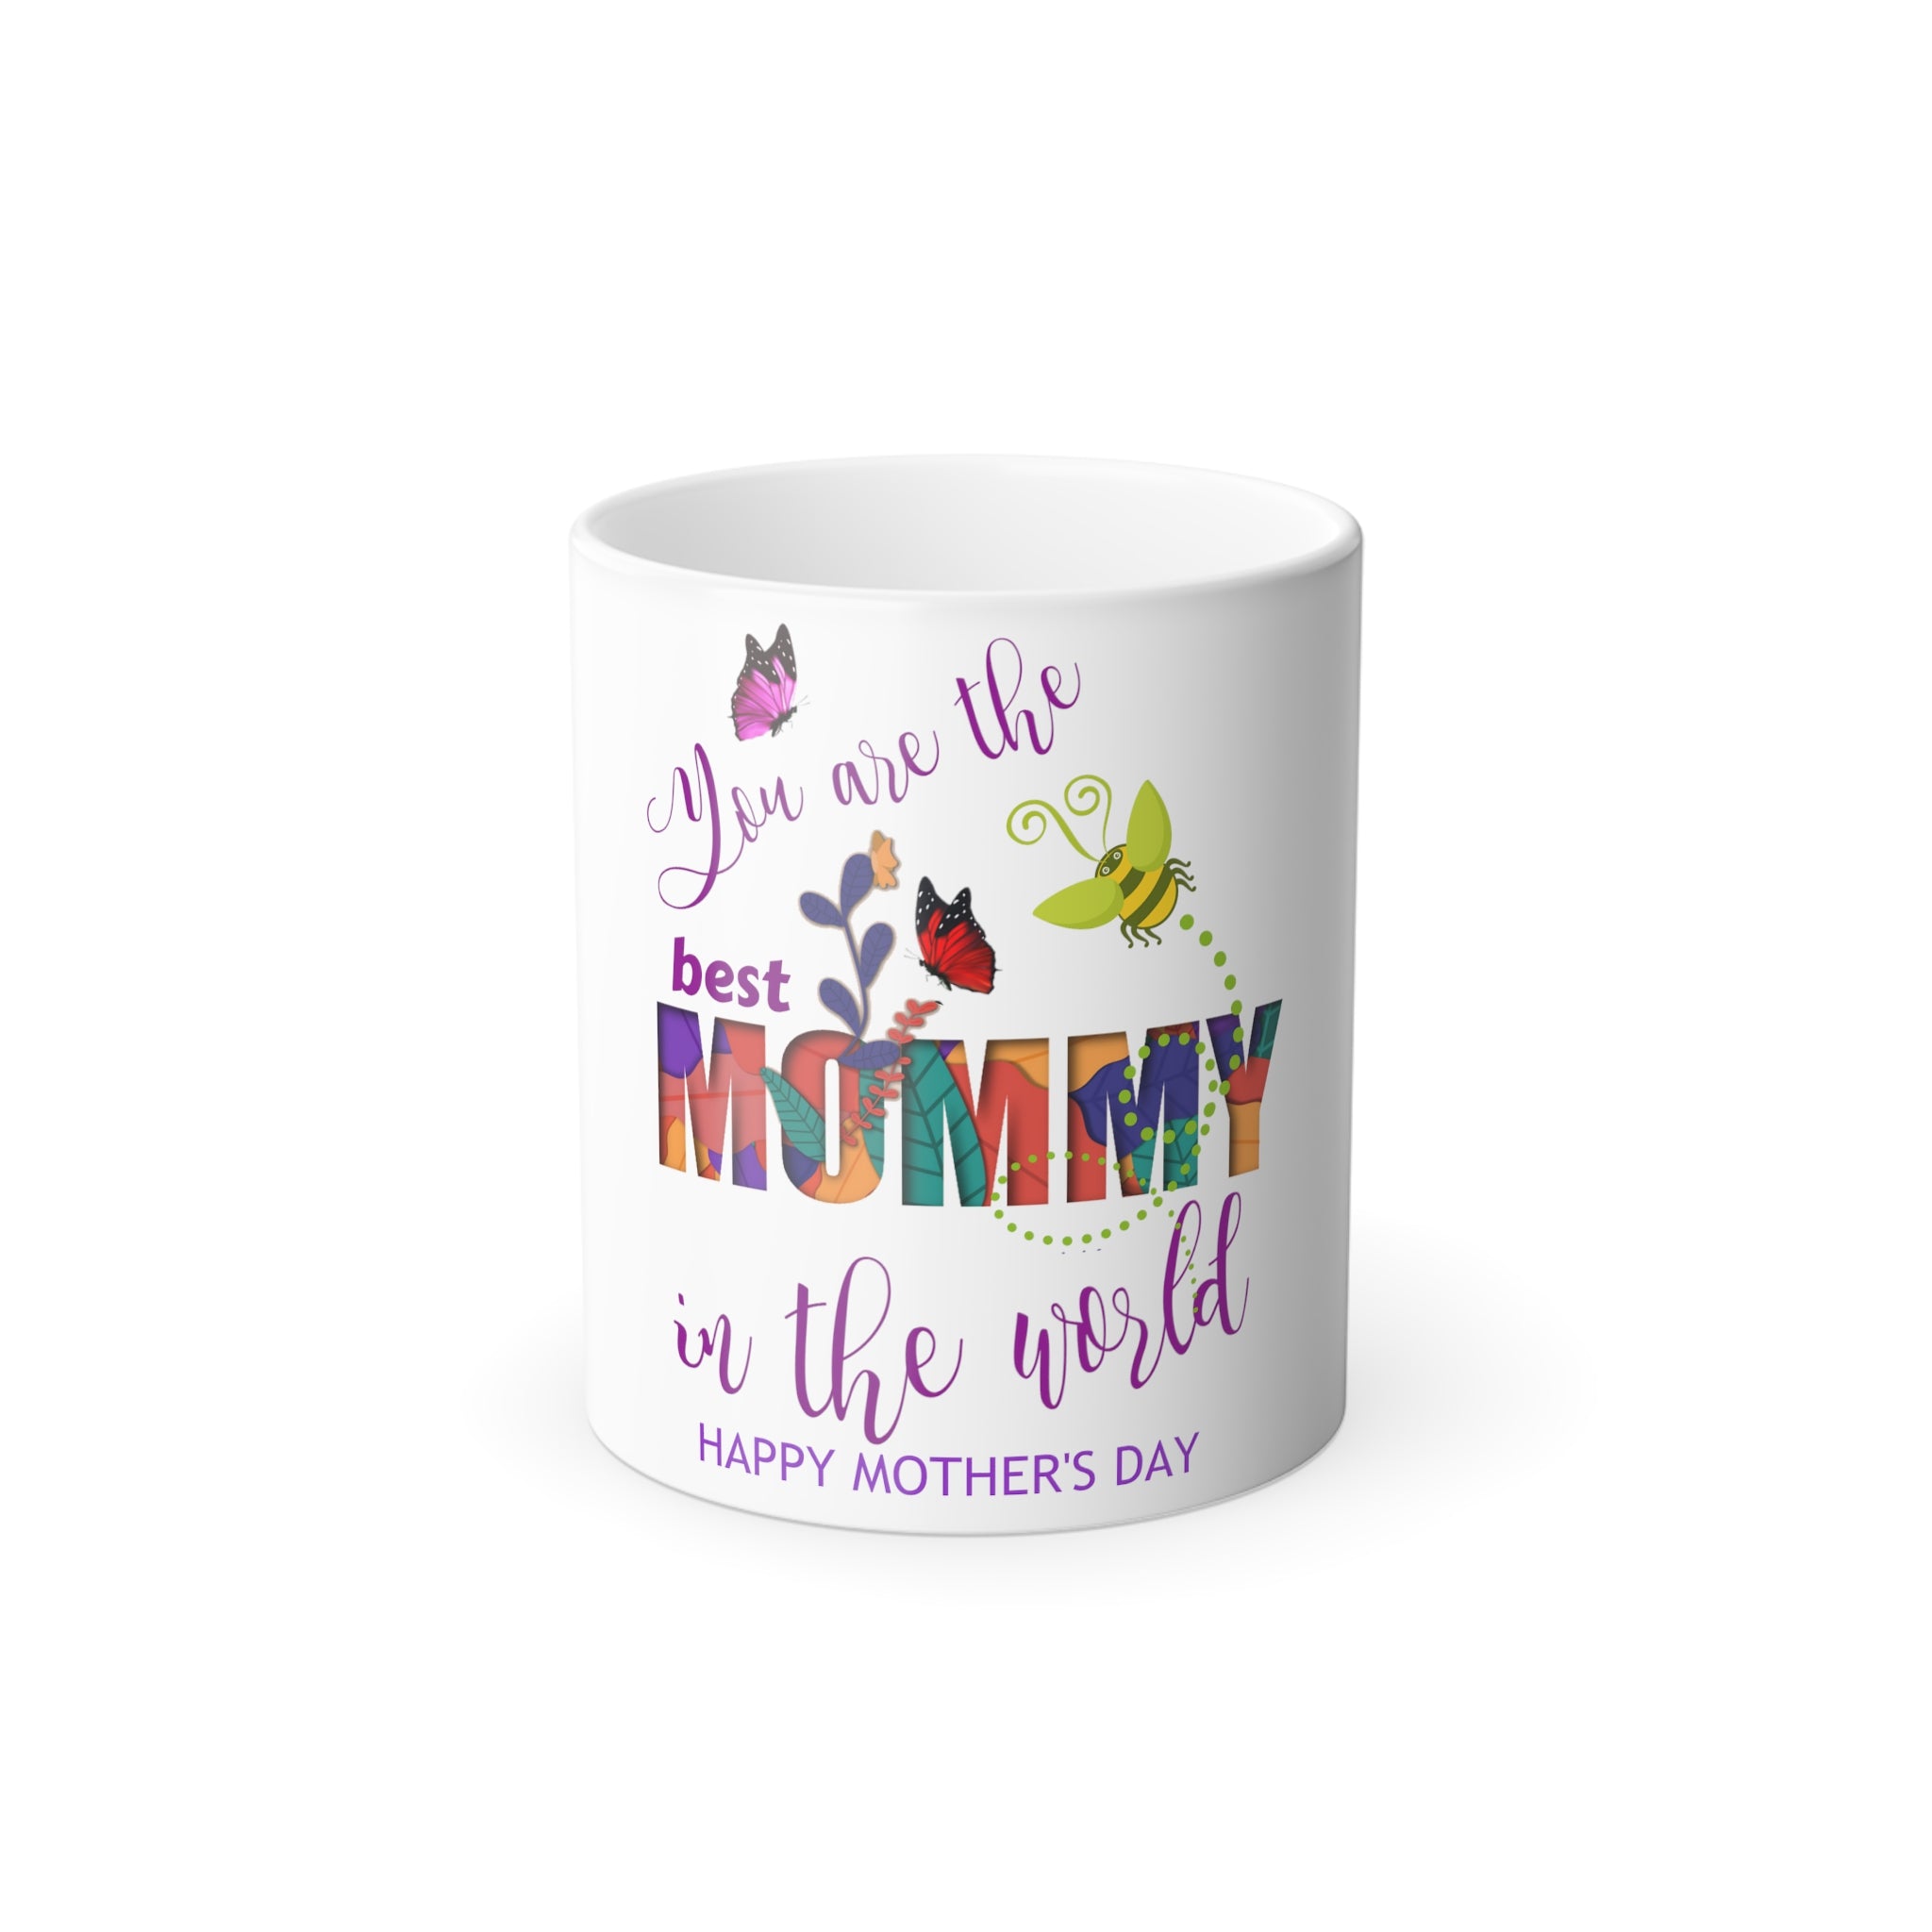 Best Mommy in The World Color Morphing Mug - Surprise Mom with Magic Heat-Changing Ceramic Cup - Unique Gift for Mother's Day and Birthdays